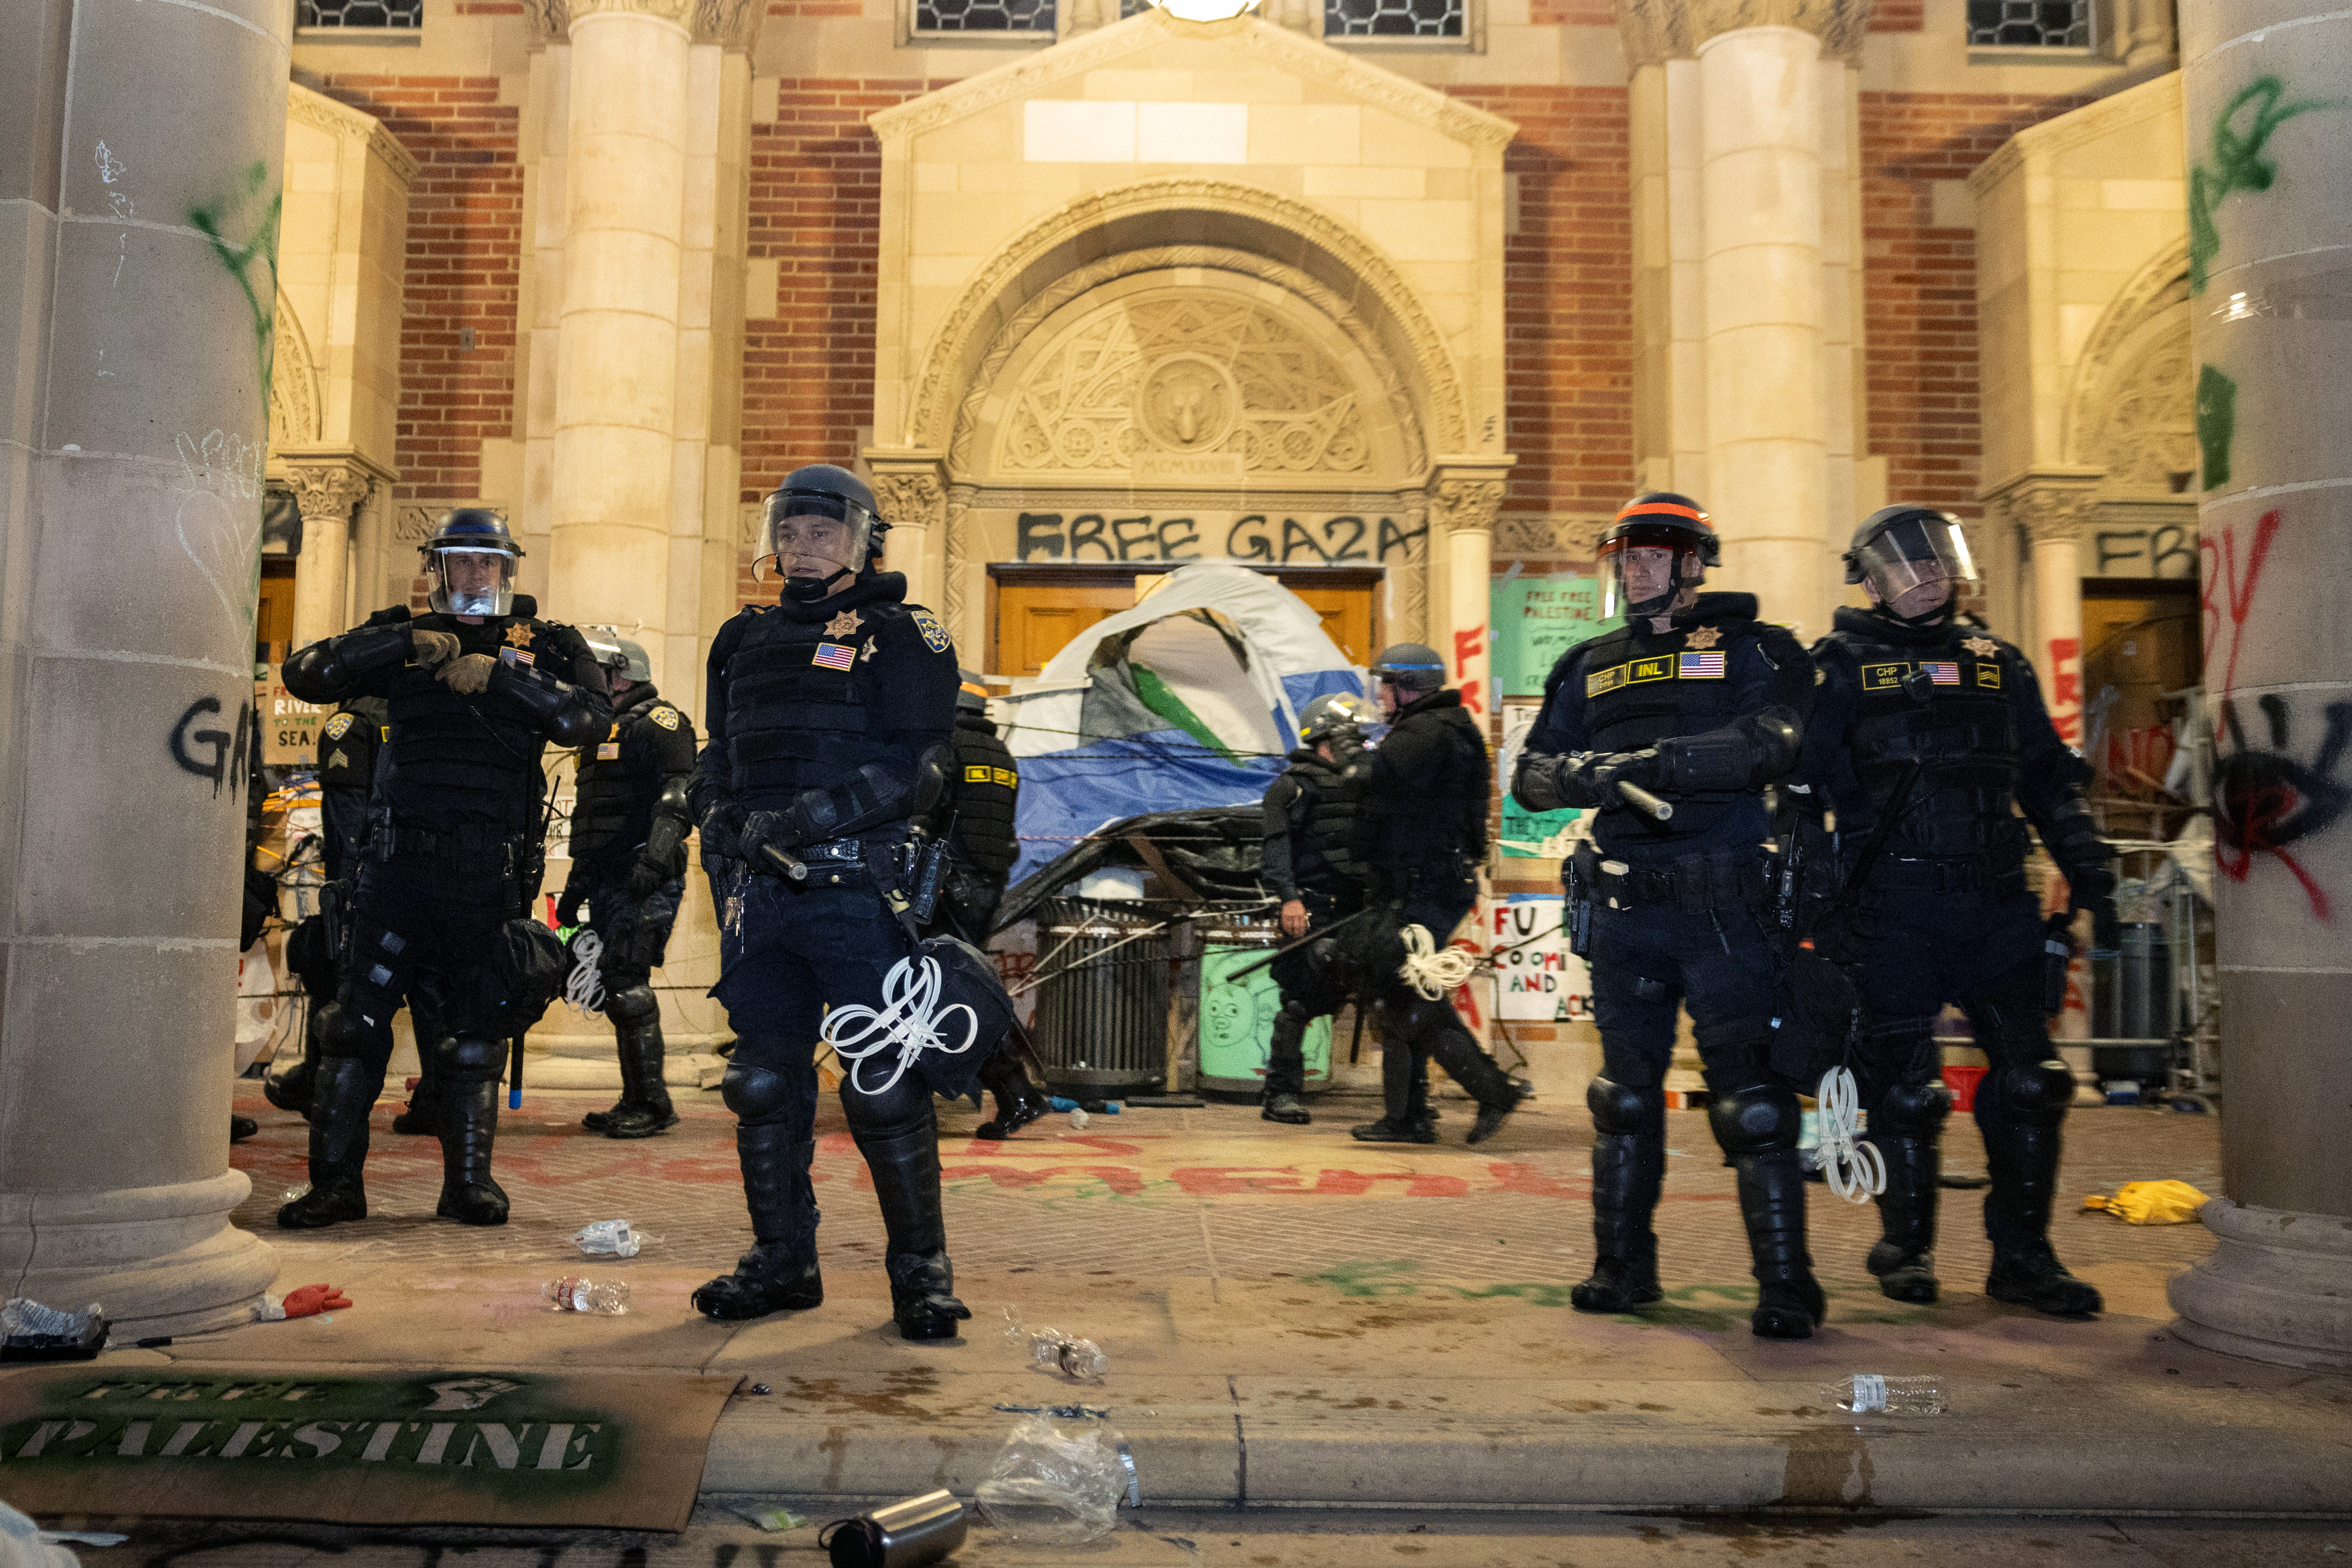  UCLA to create new office of campus safety following unrest over pro-Palestinian demonstrations